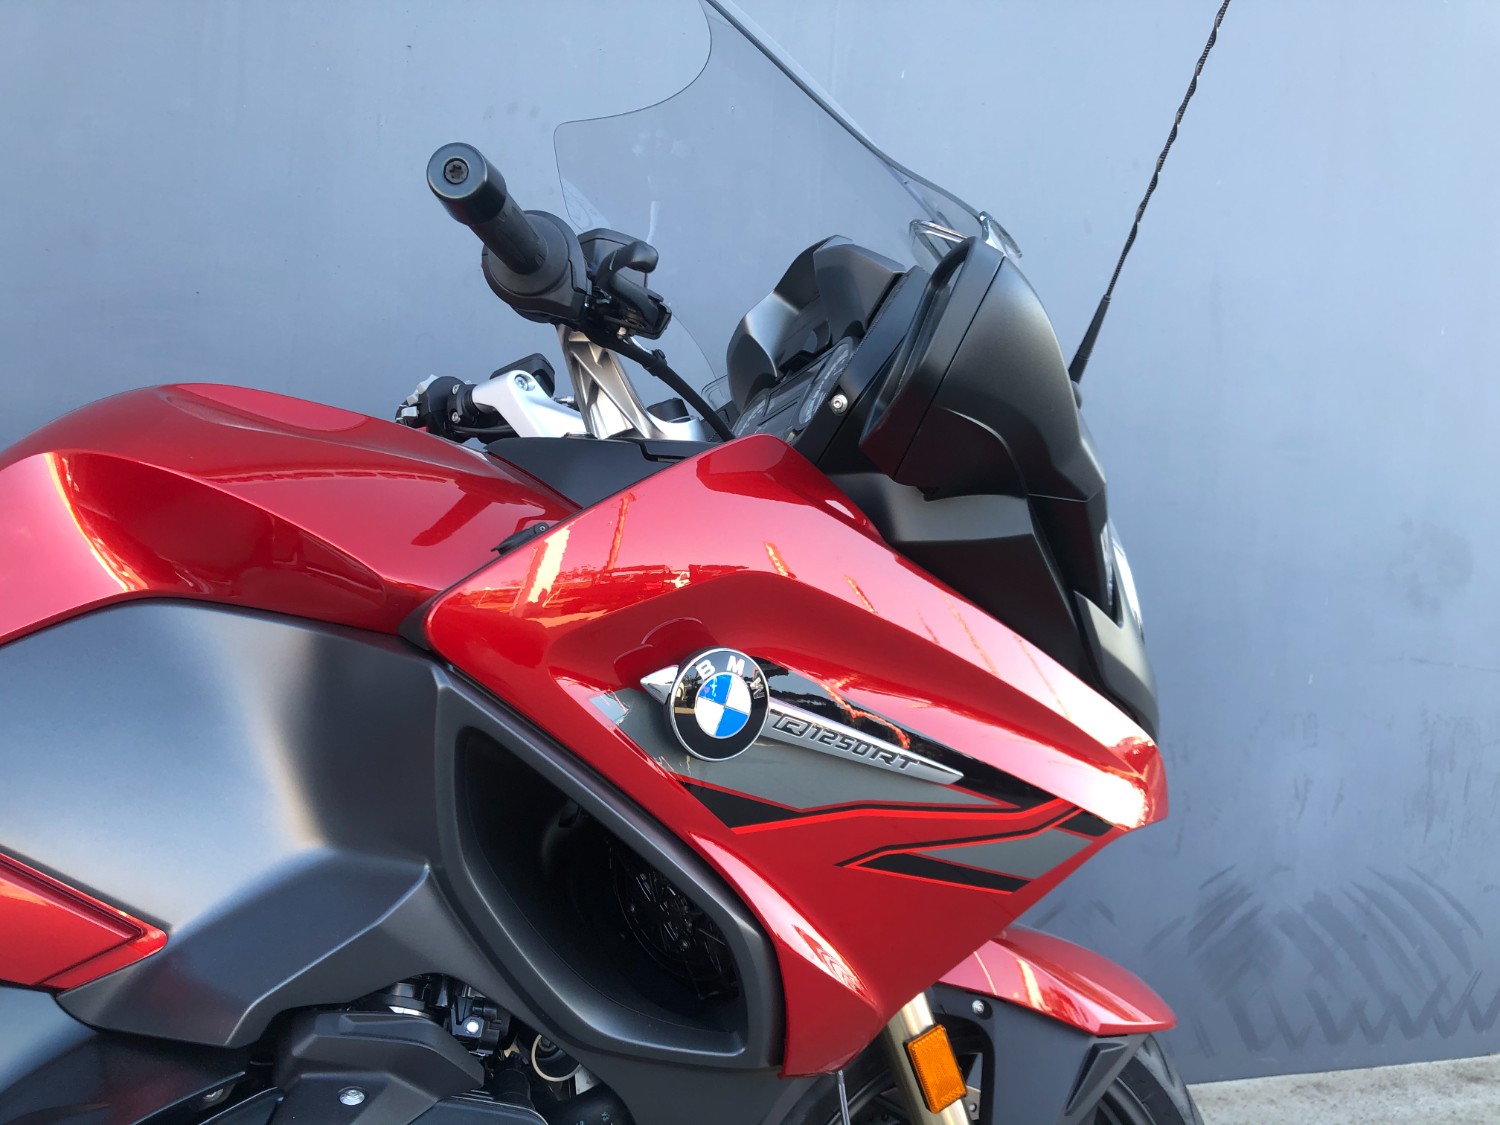 2020 BMW R1250RT SPORT Motorcycle Image 18